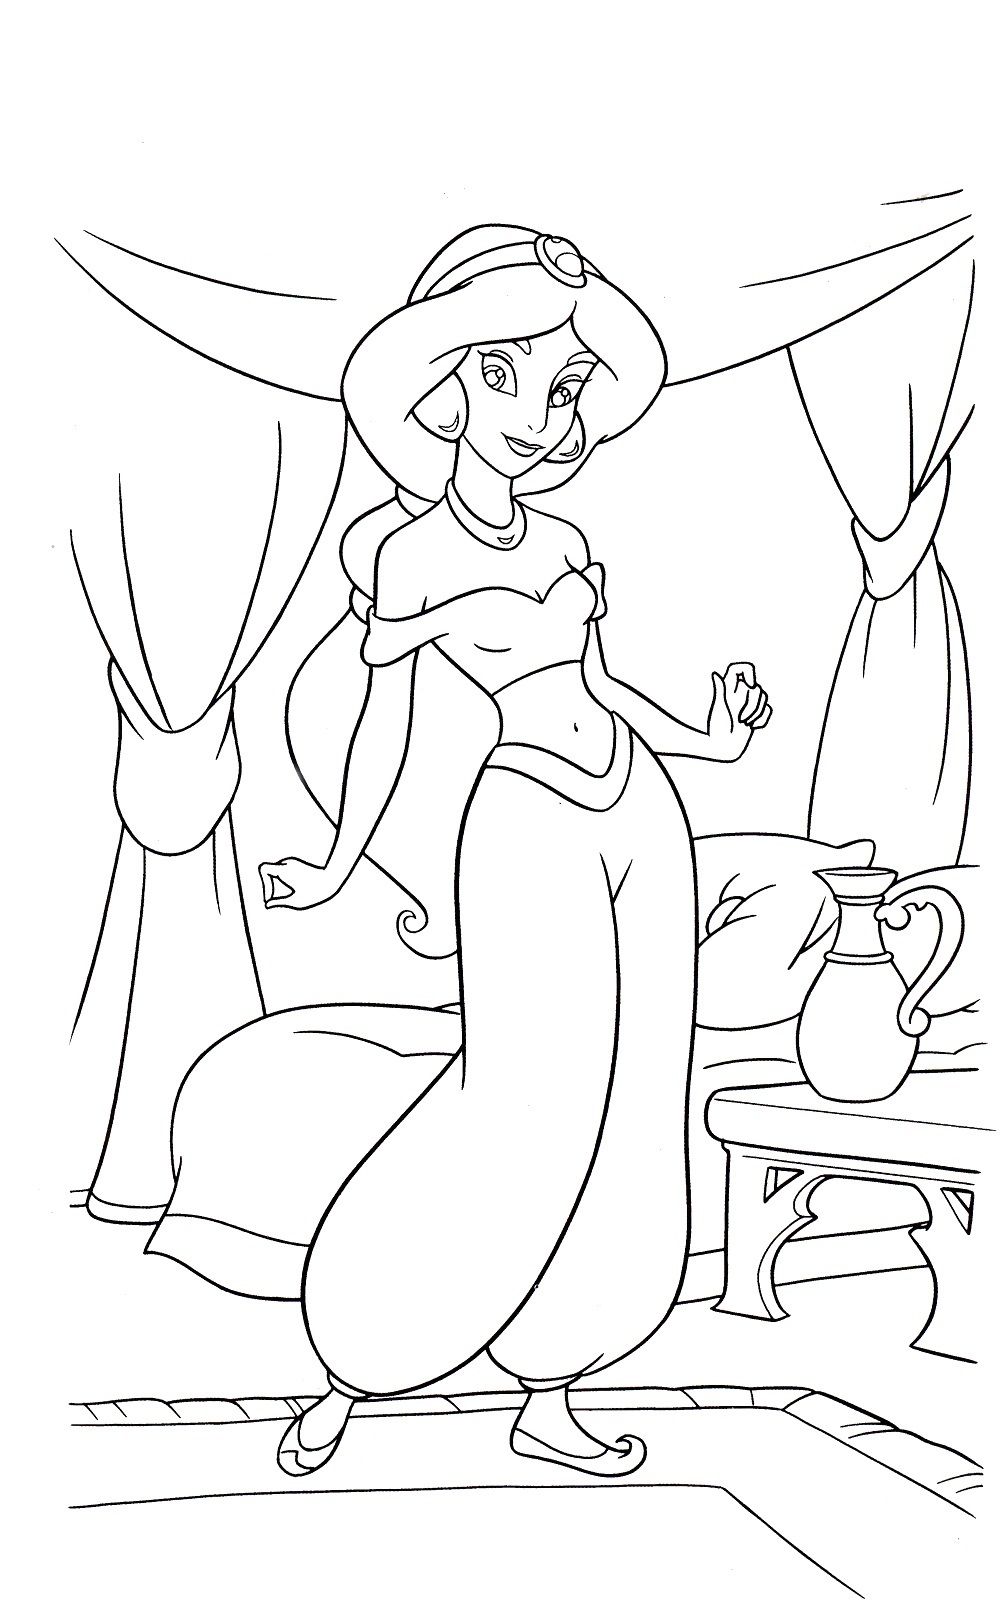 Download Free Printable Jasmine Coloring Pages For Kids - Best ...